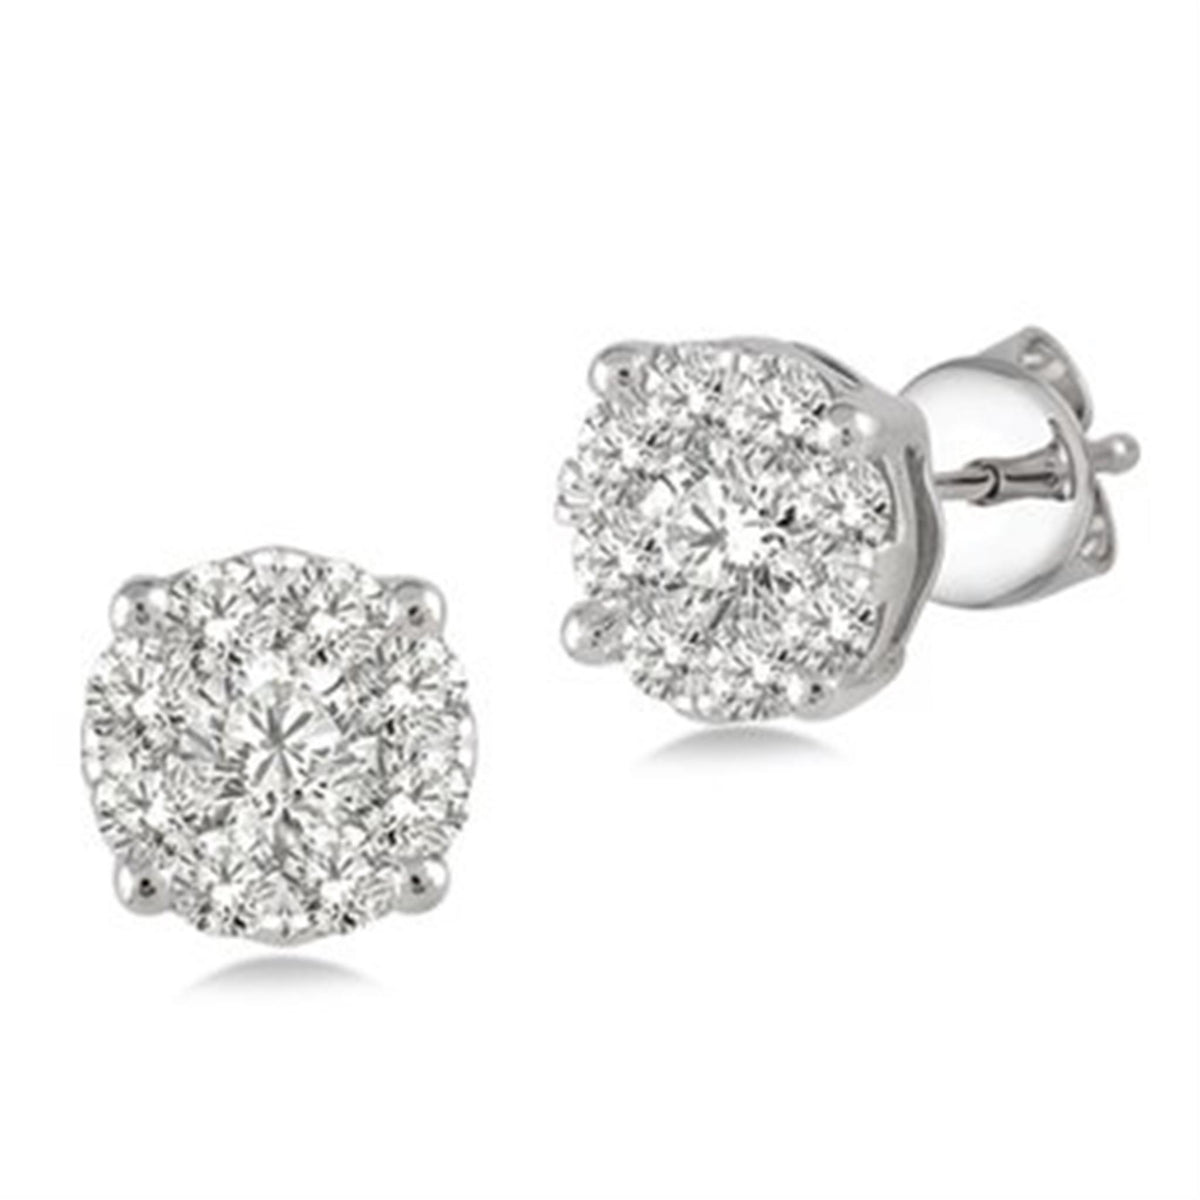 Lovebright 14Kt White Gold Stud Earrings With .35cttw Natural Diamonds